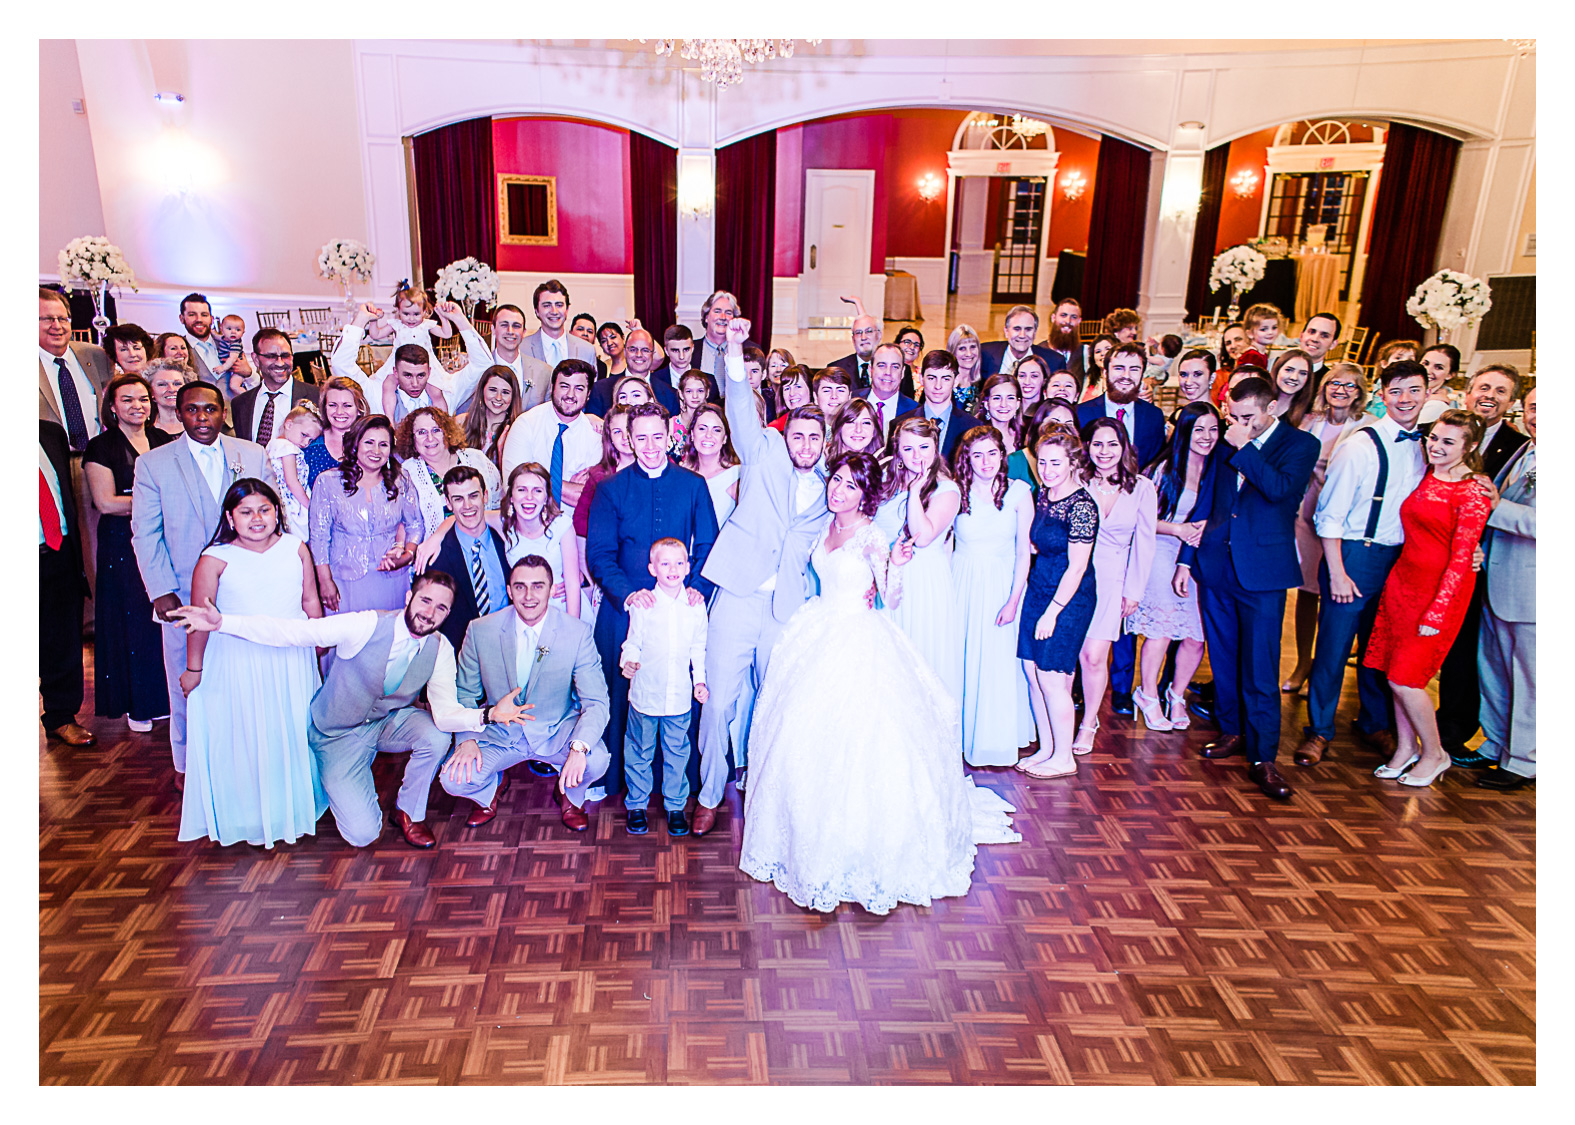 foxchase-manor-wedding-reception-wedding-guests-group-picture.jpg